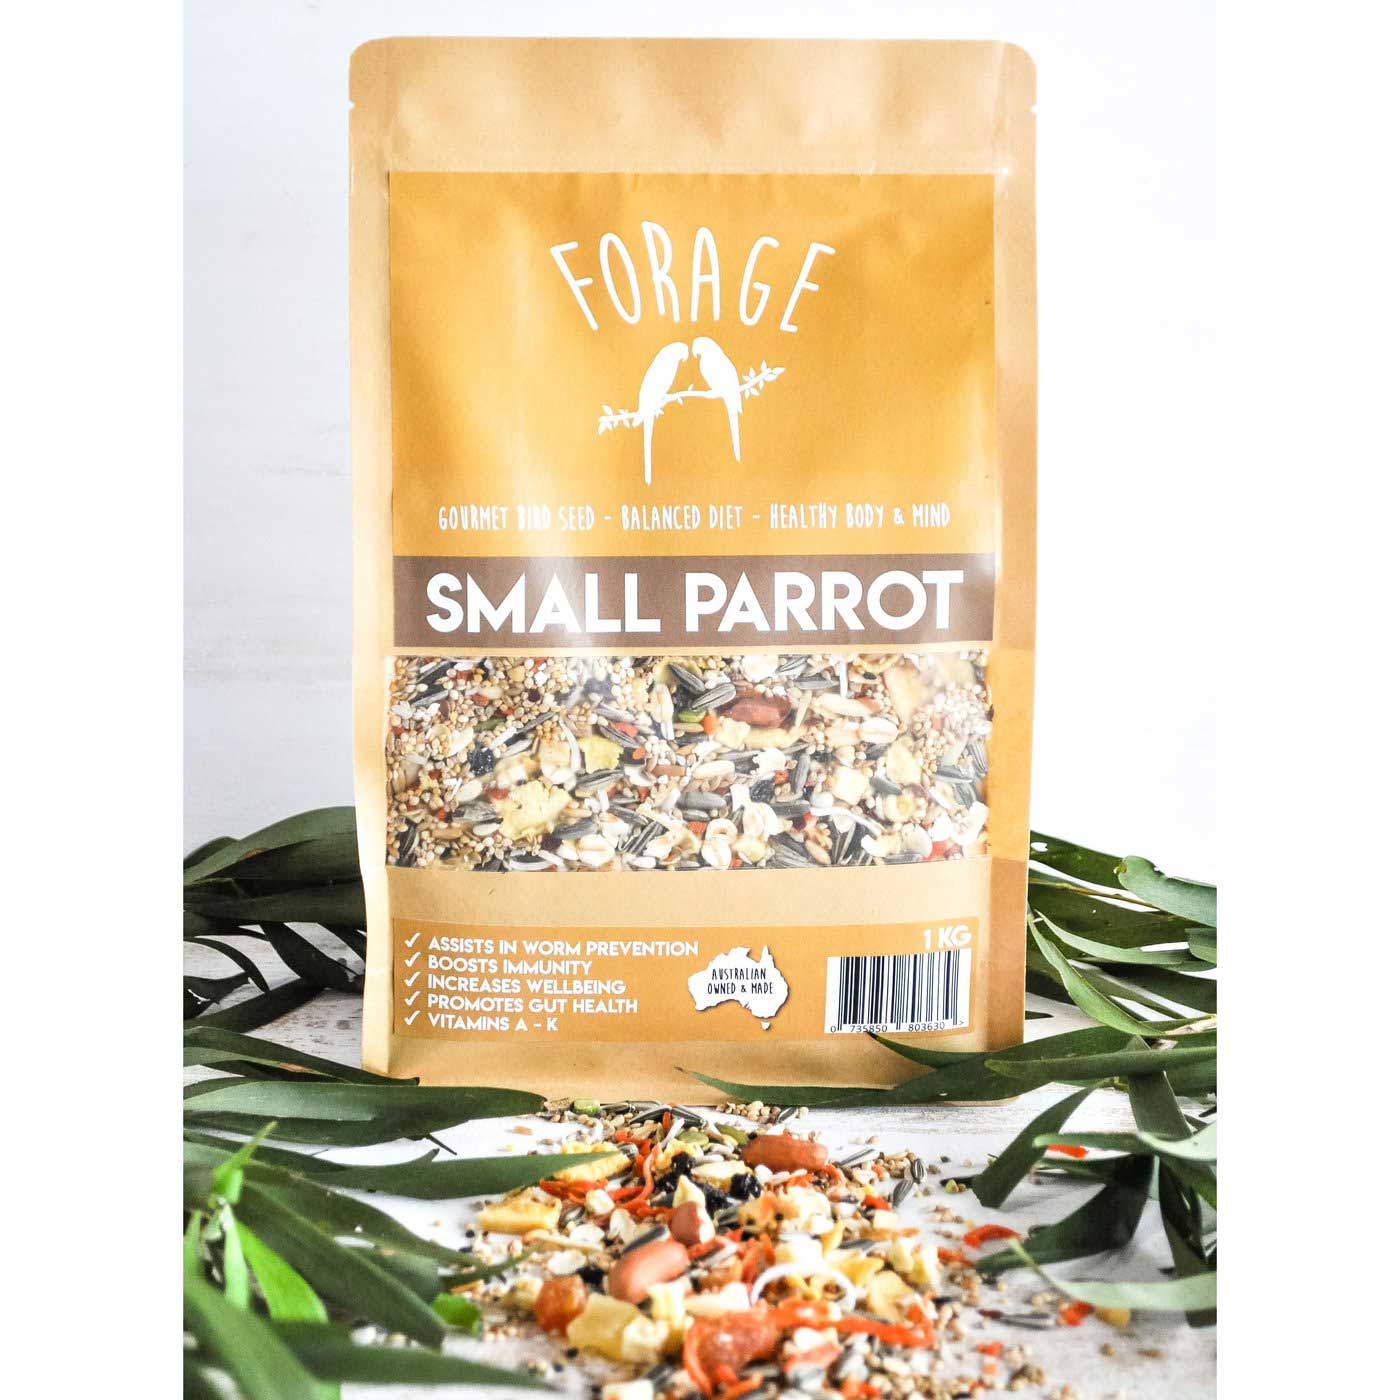 Forage Gourmet Small Parrot Food